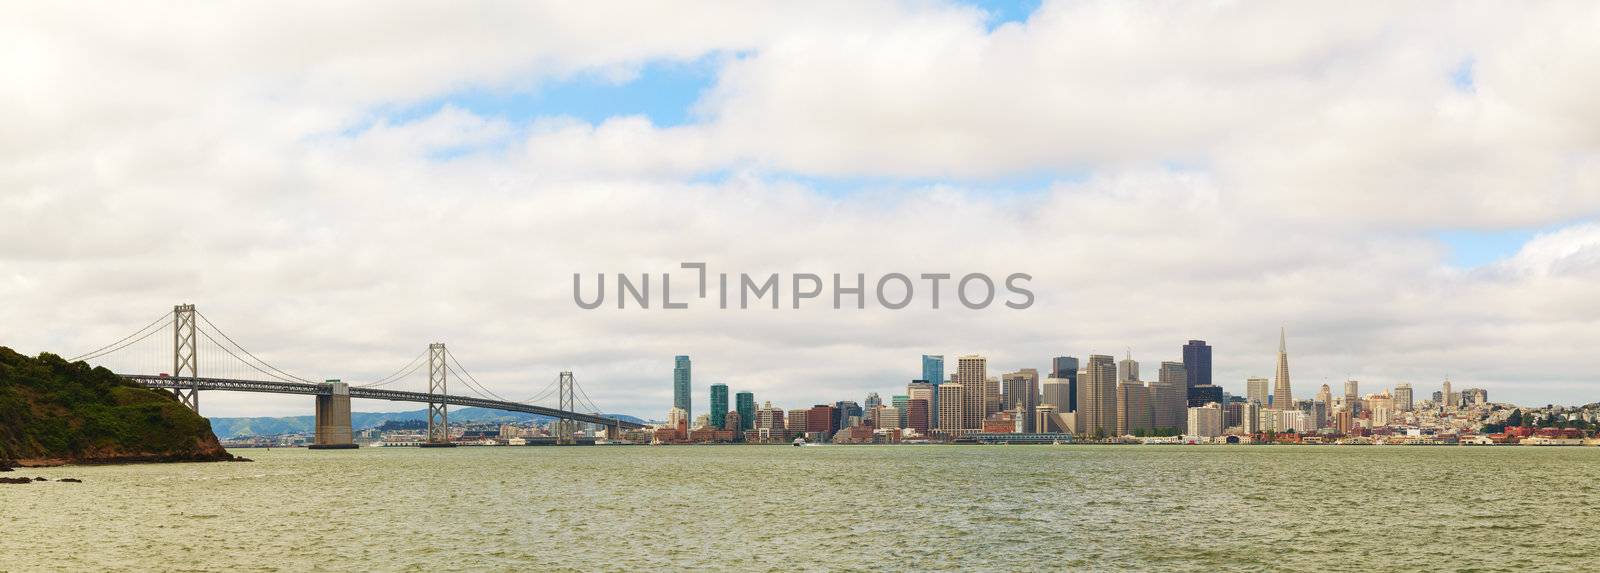 Panoramic view to the downtown of San Francisco as seen from the bay